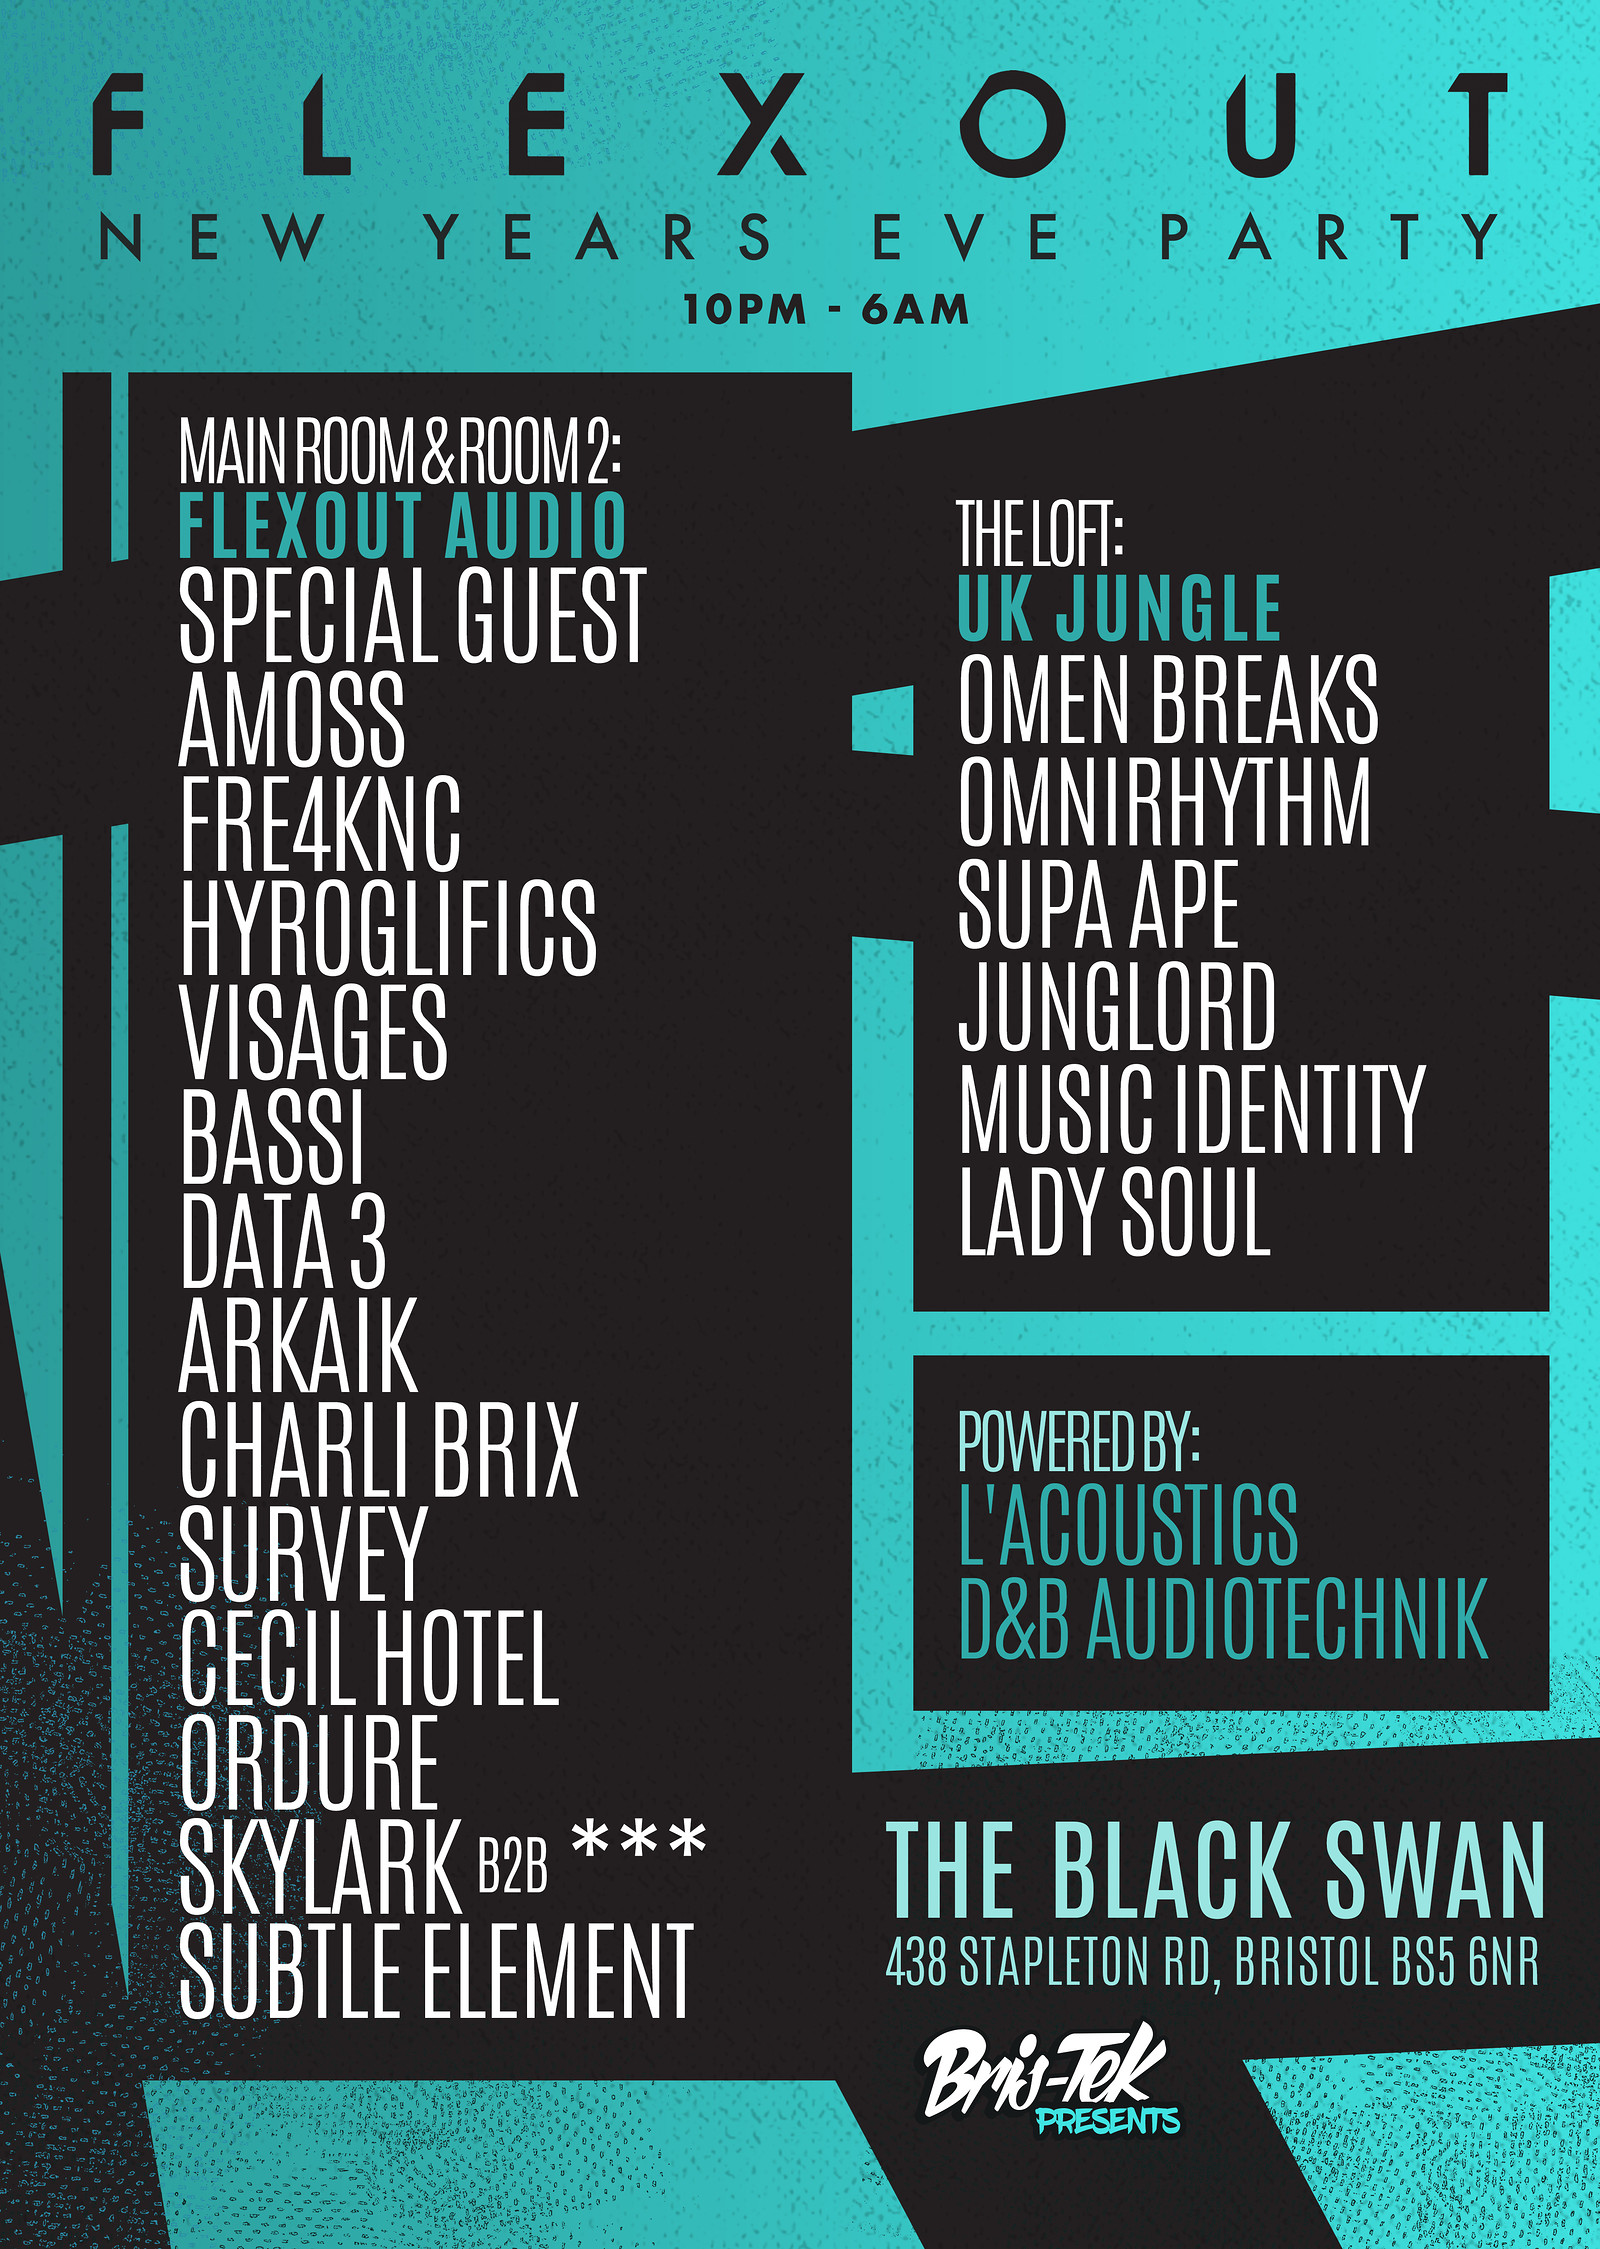 Flexout Audio - NYE Party - The Black Swan, The Black Swan – Headfirst ...